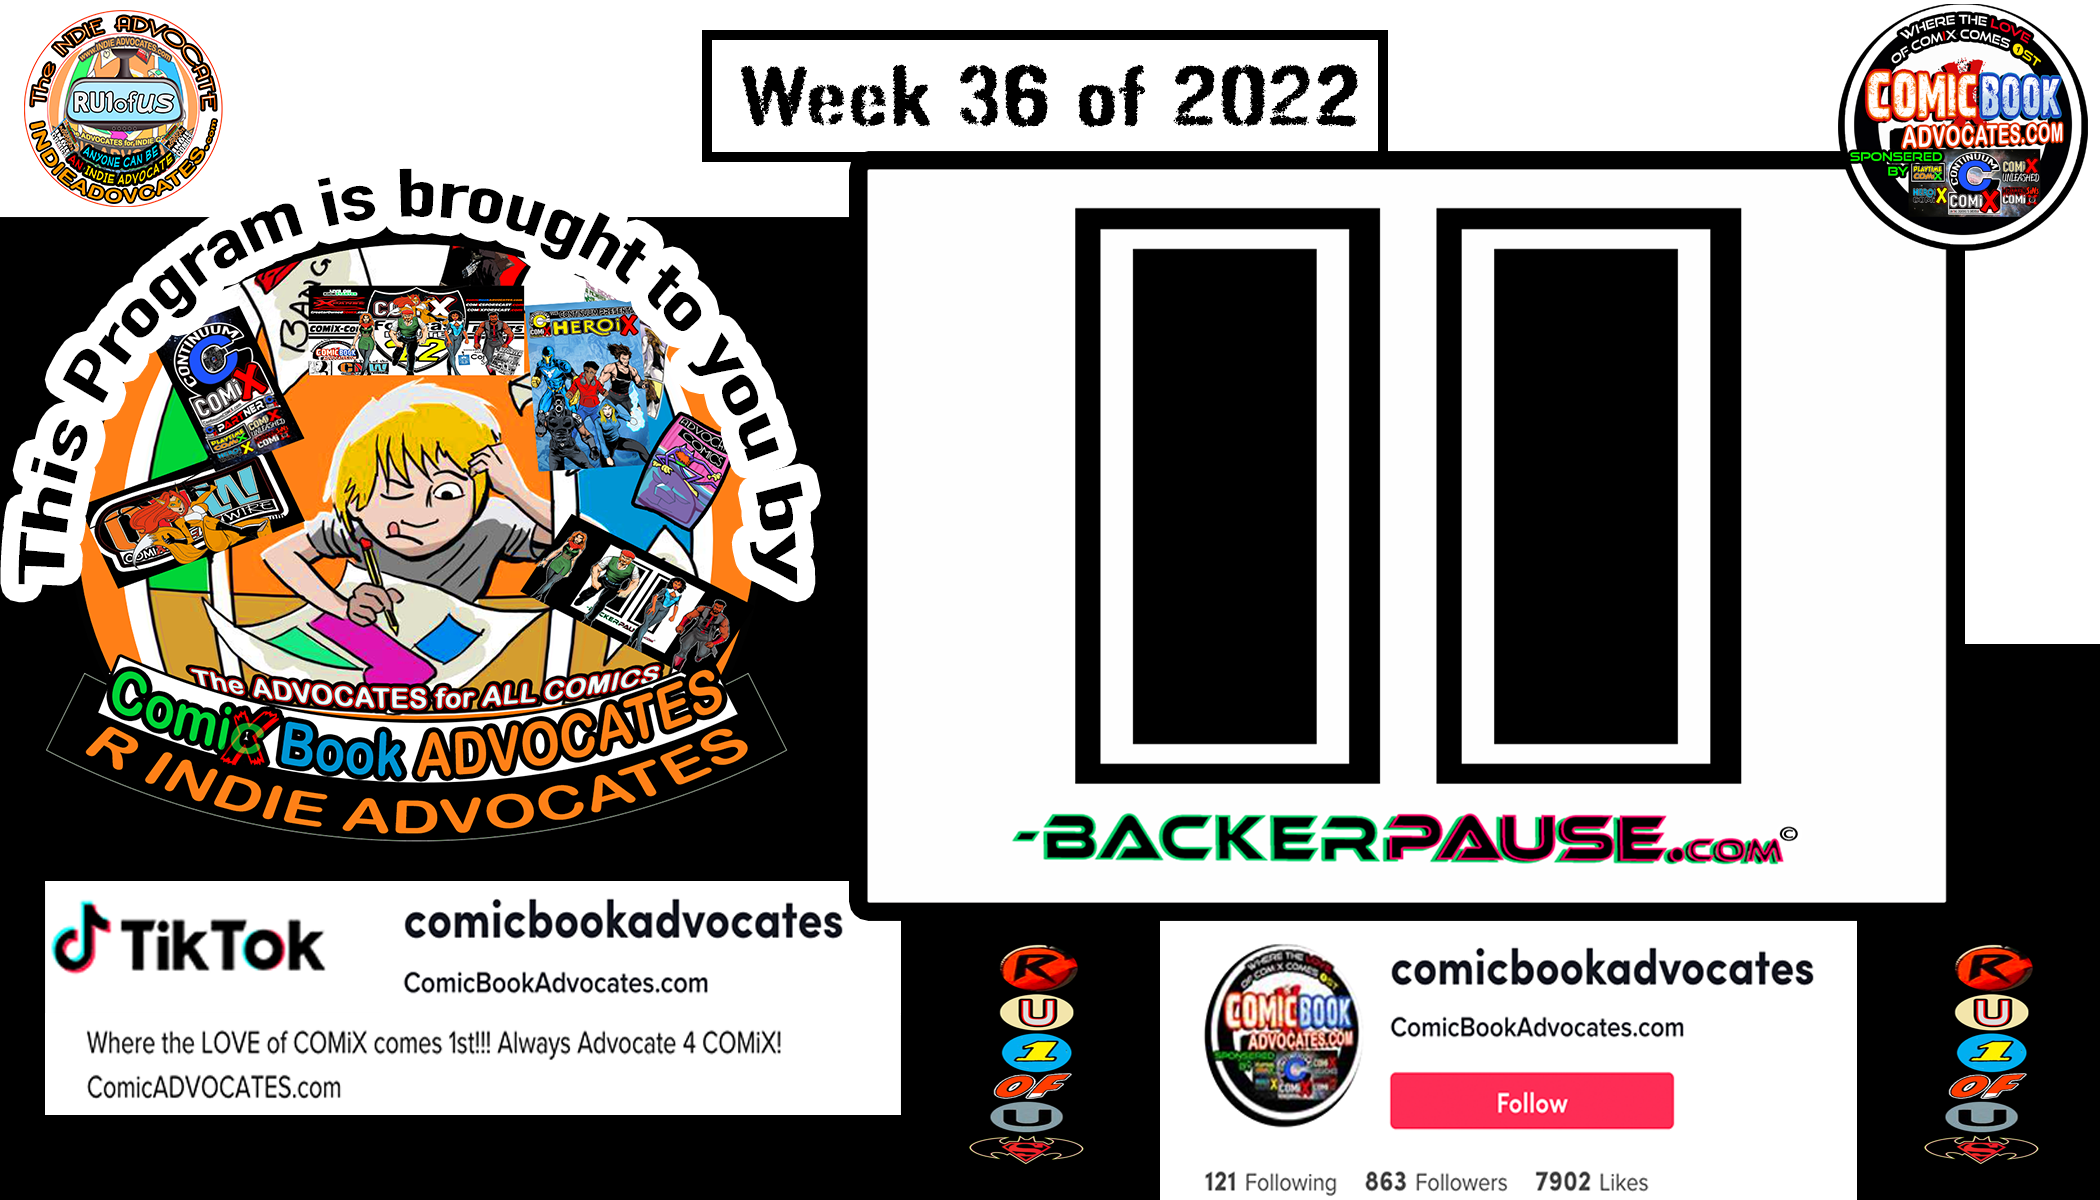 Indie Creators Shining on CROWDFUNDING SITES- Backer PAUSE wk 37 of 22